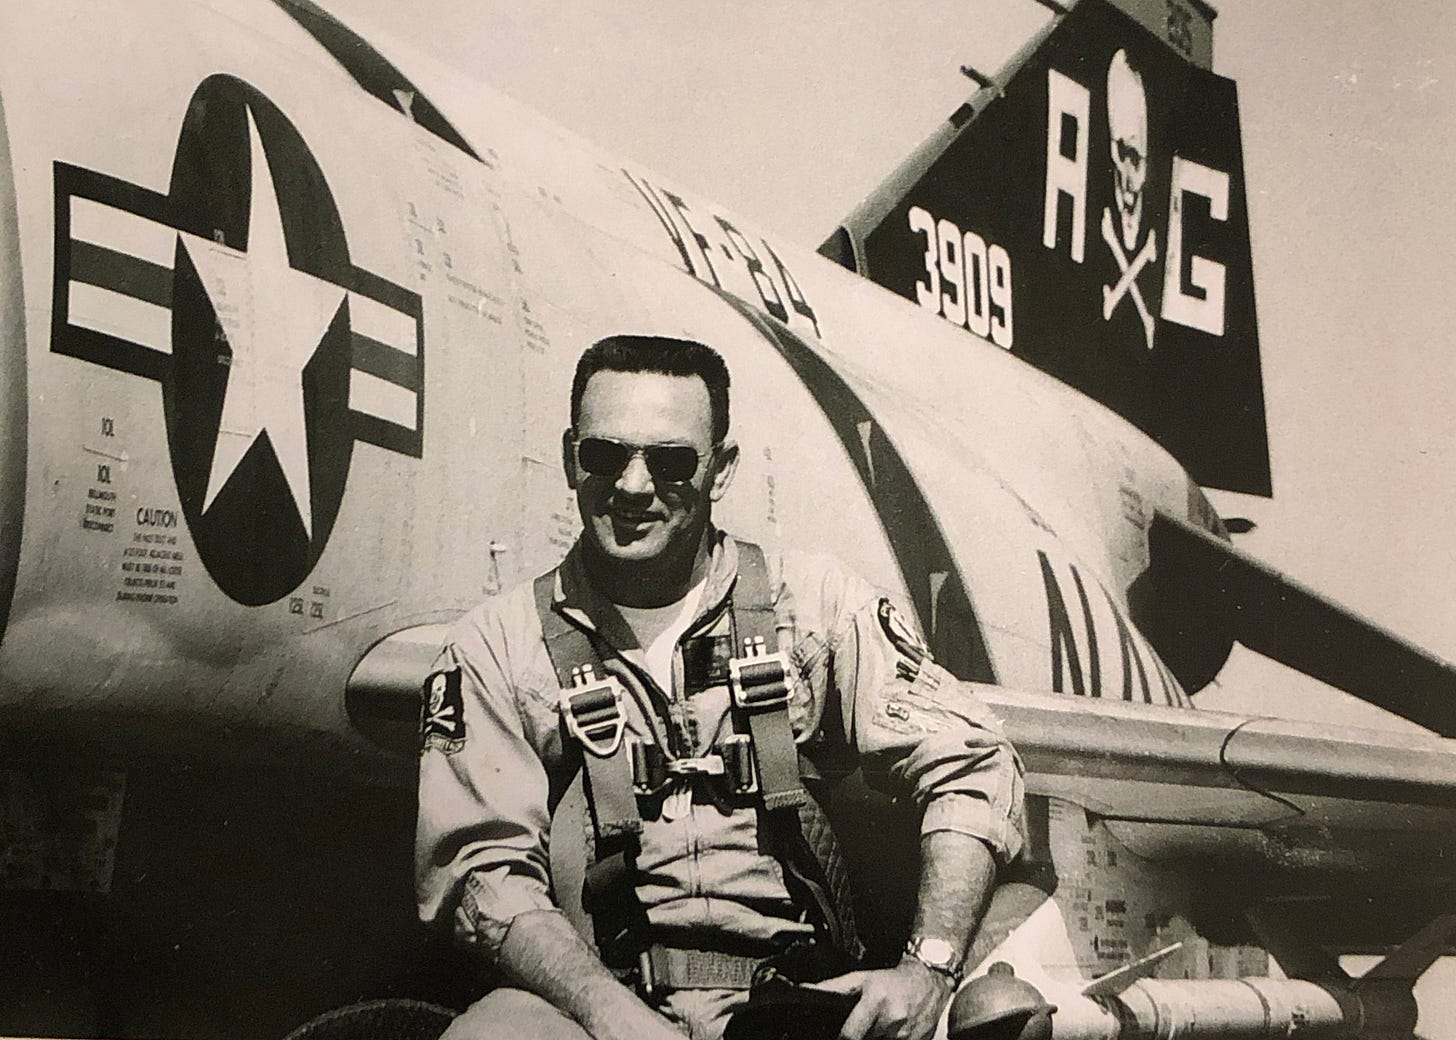 A man with a crewcut wearing a flightsuit and aviator shades poses in front of a Navy jet.